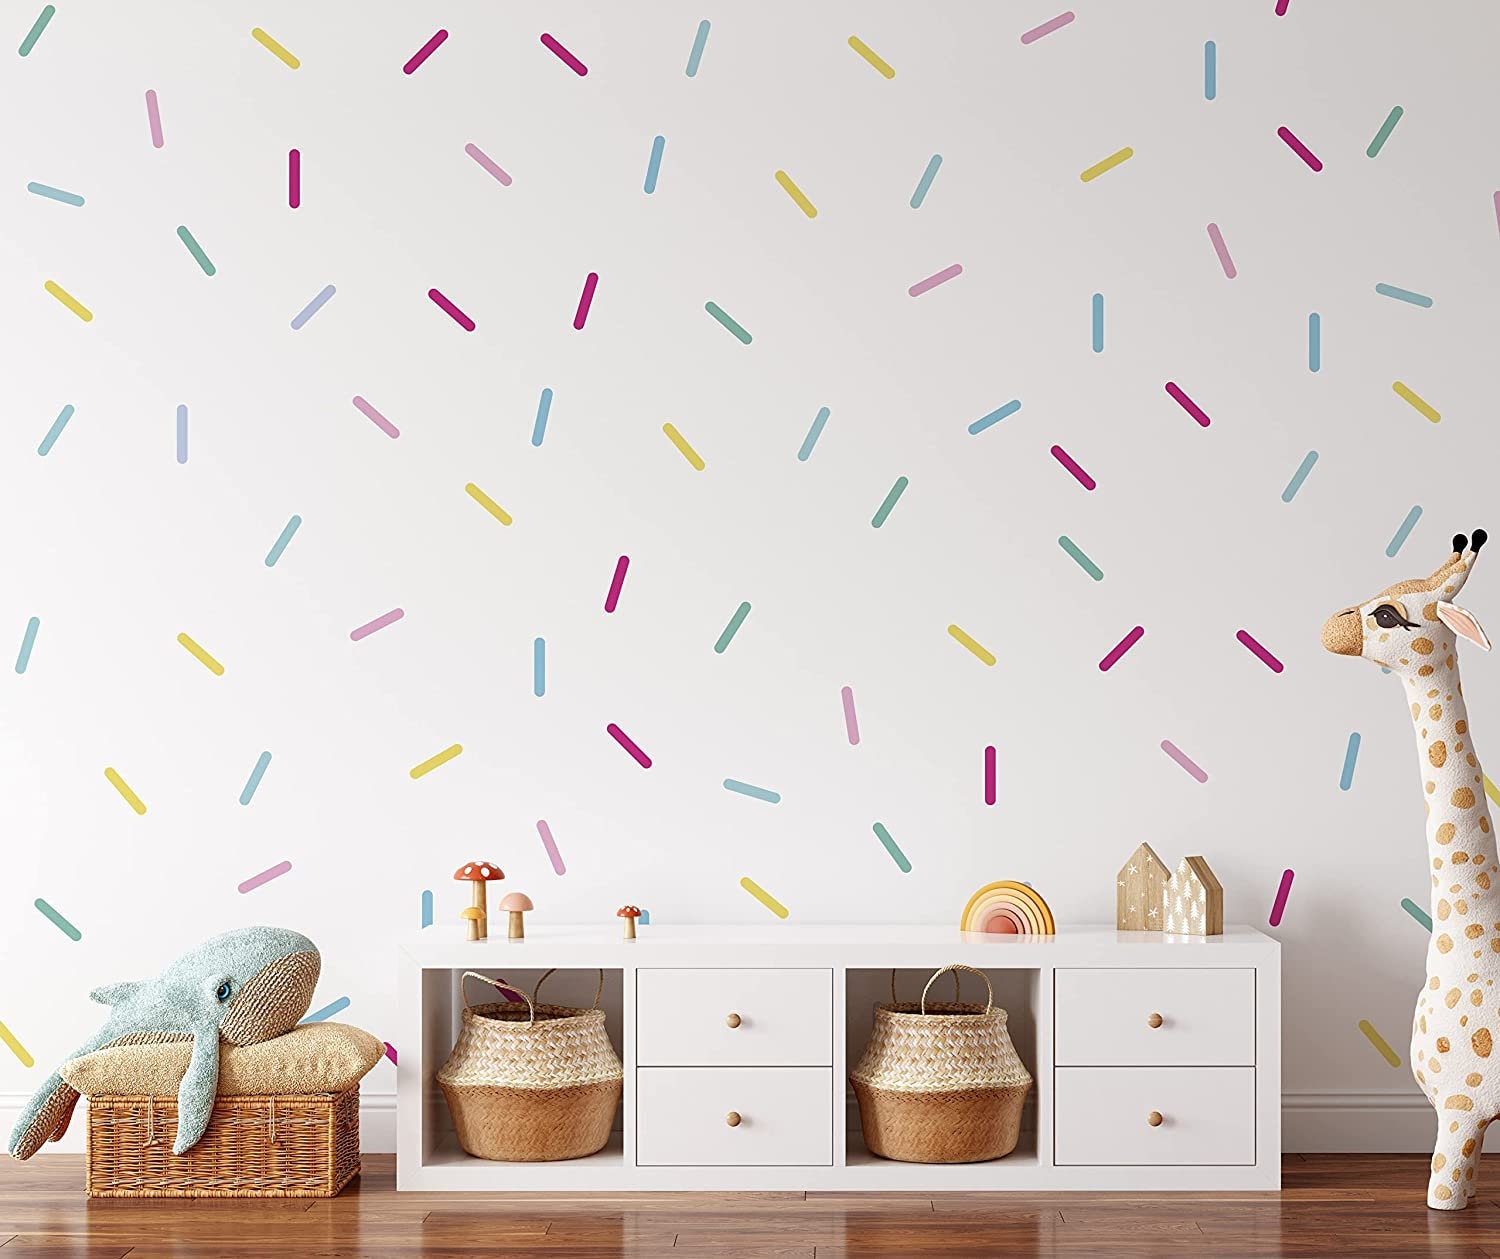 Colourful Sprinkle Wall Stickers, Sprinkle Decals For Kids Bedroom Nursery Boys Girls Confetti Stickers